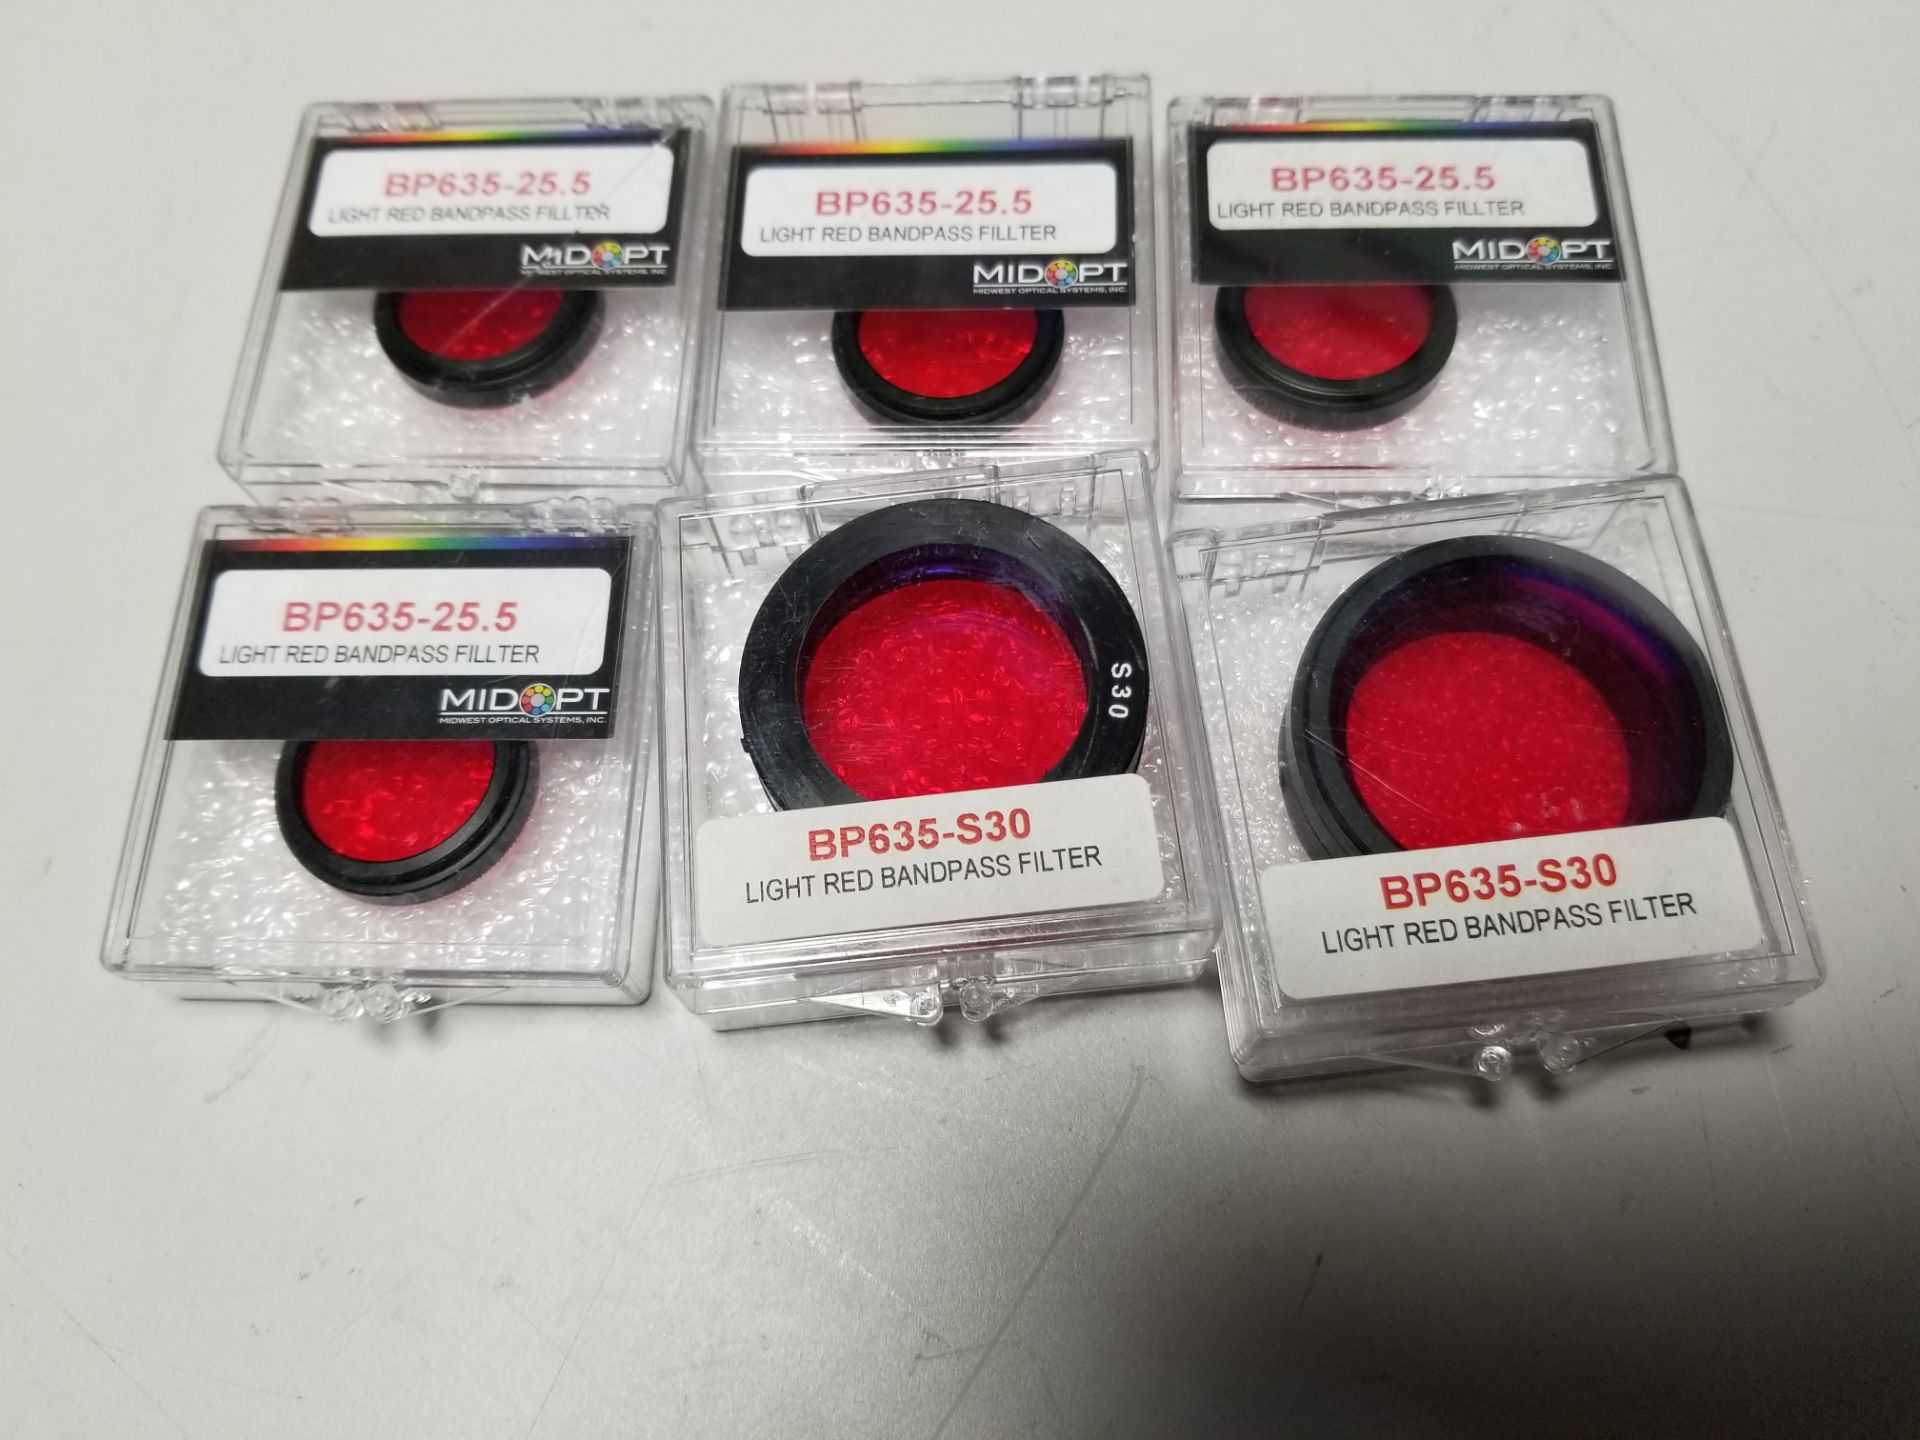 LOT OF 6 NEW MIDOPT OPTICAL BANDPASS FILTERS - Image 4 of 4